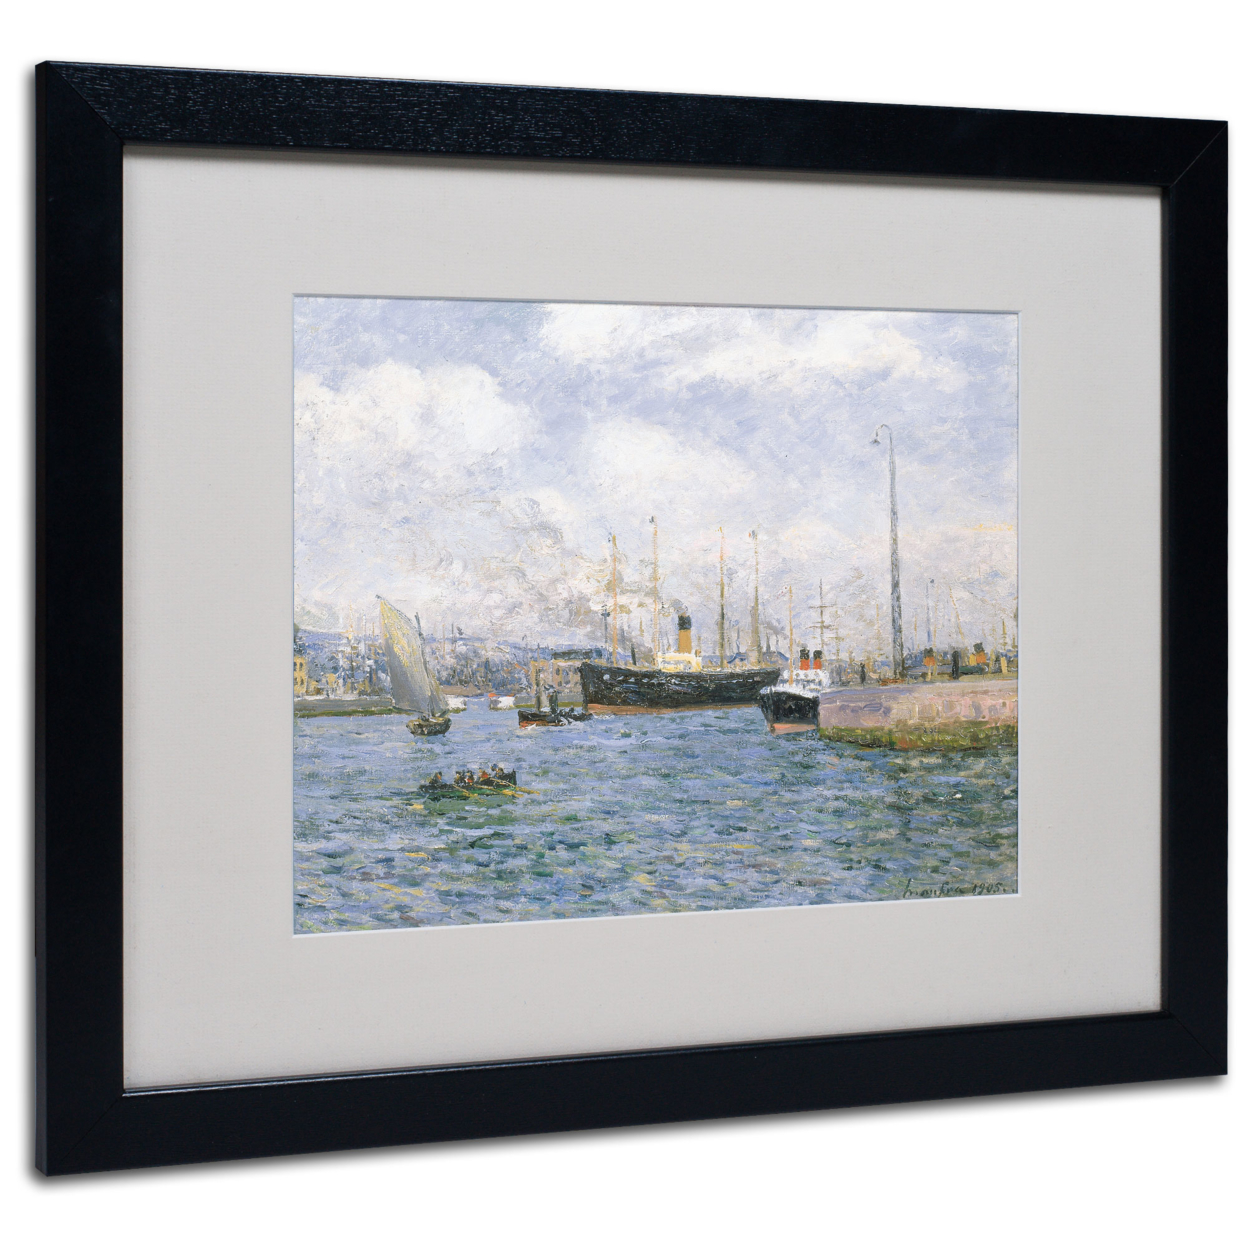 Maxime Maufra 'Departure From Havre 1905' Black Wooden Framed Art 18 X 22 Inches